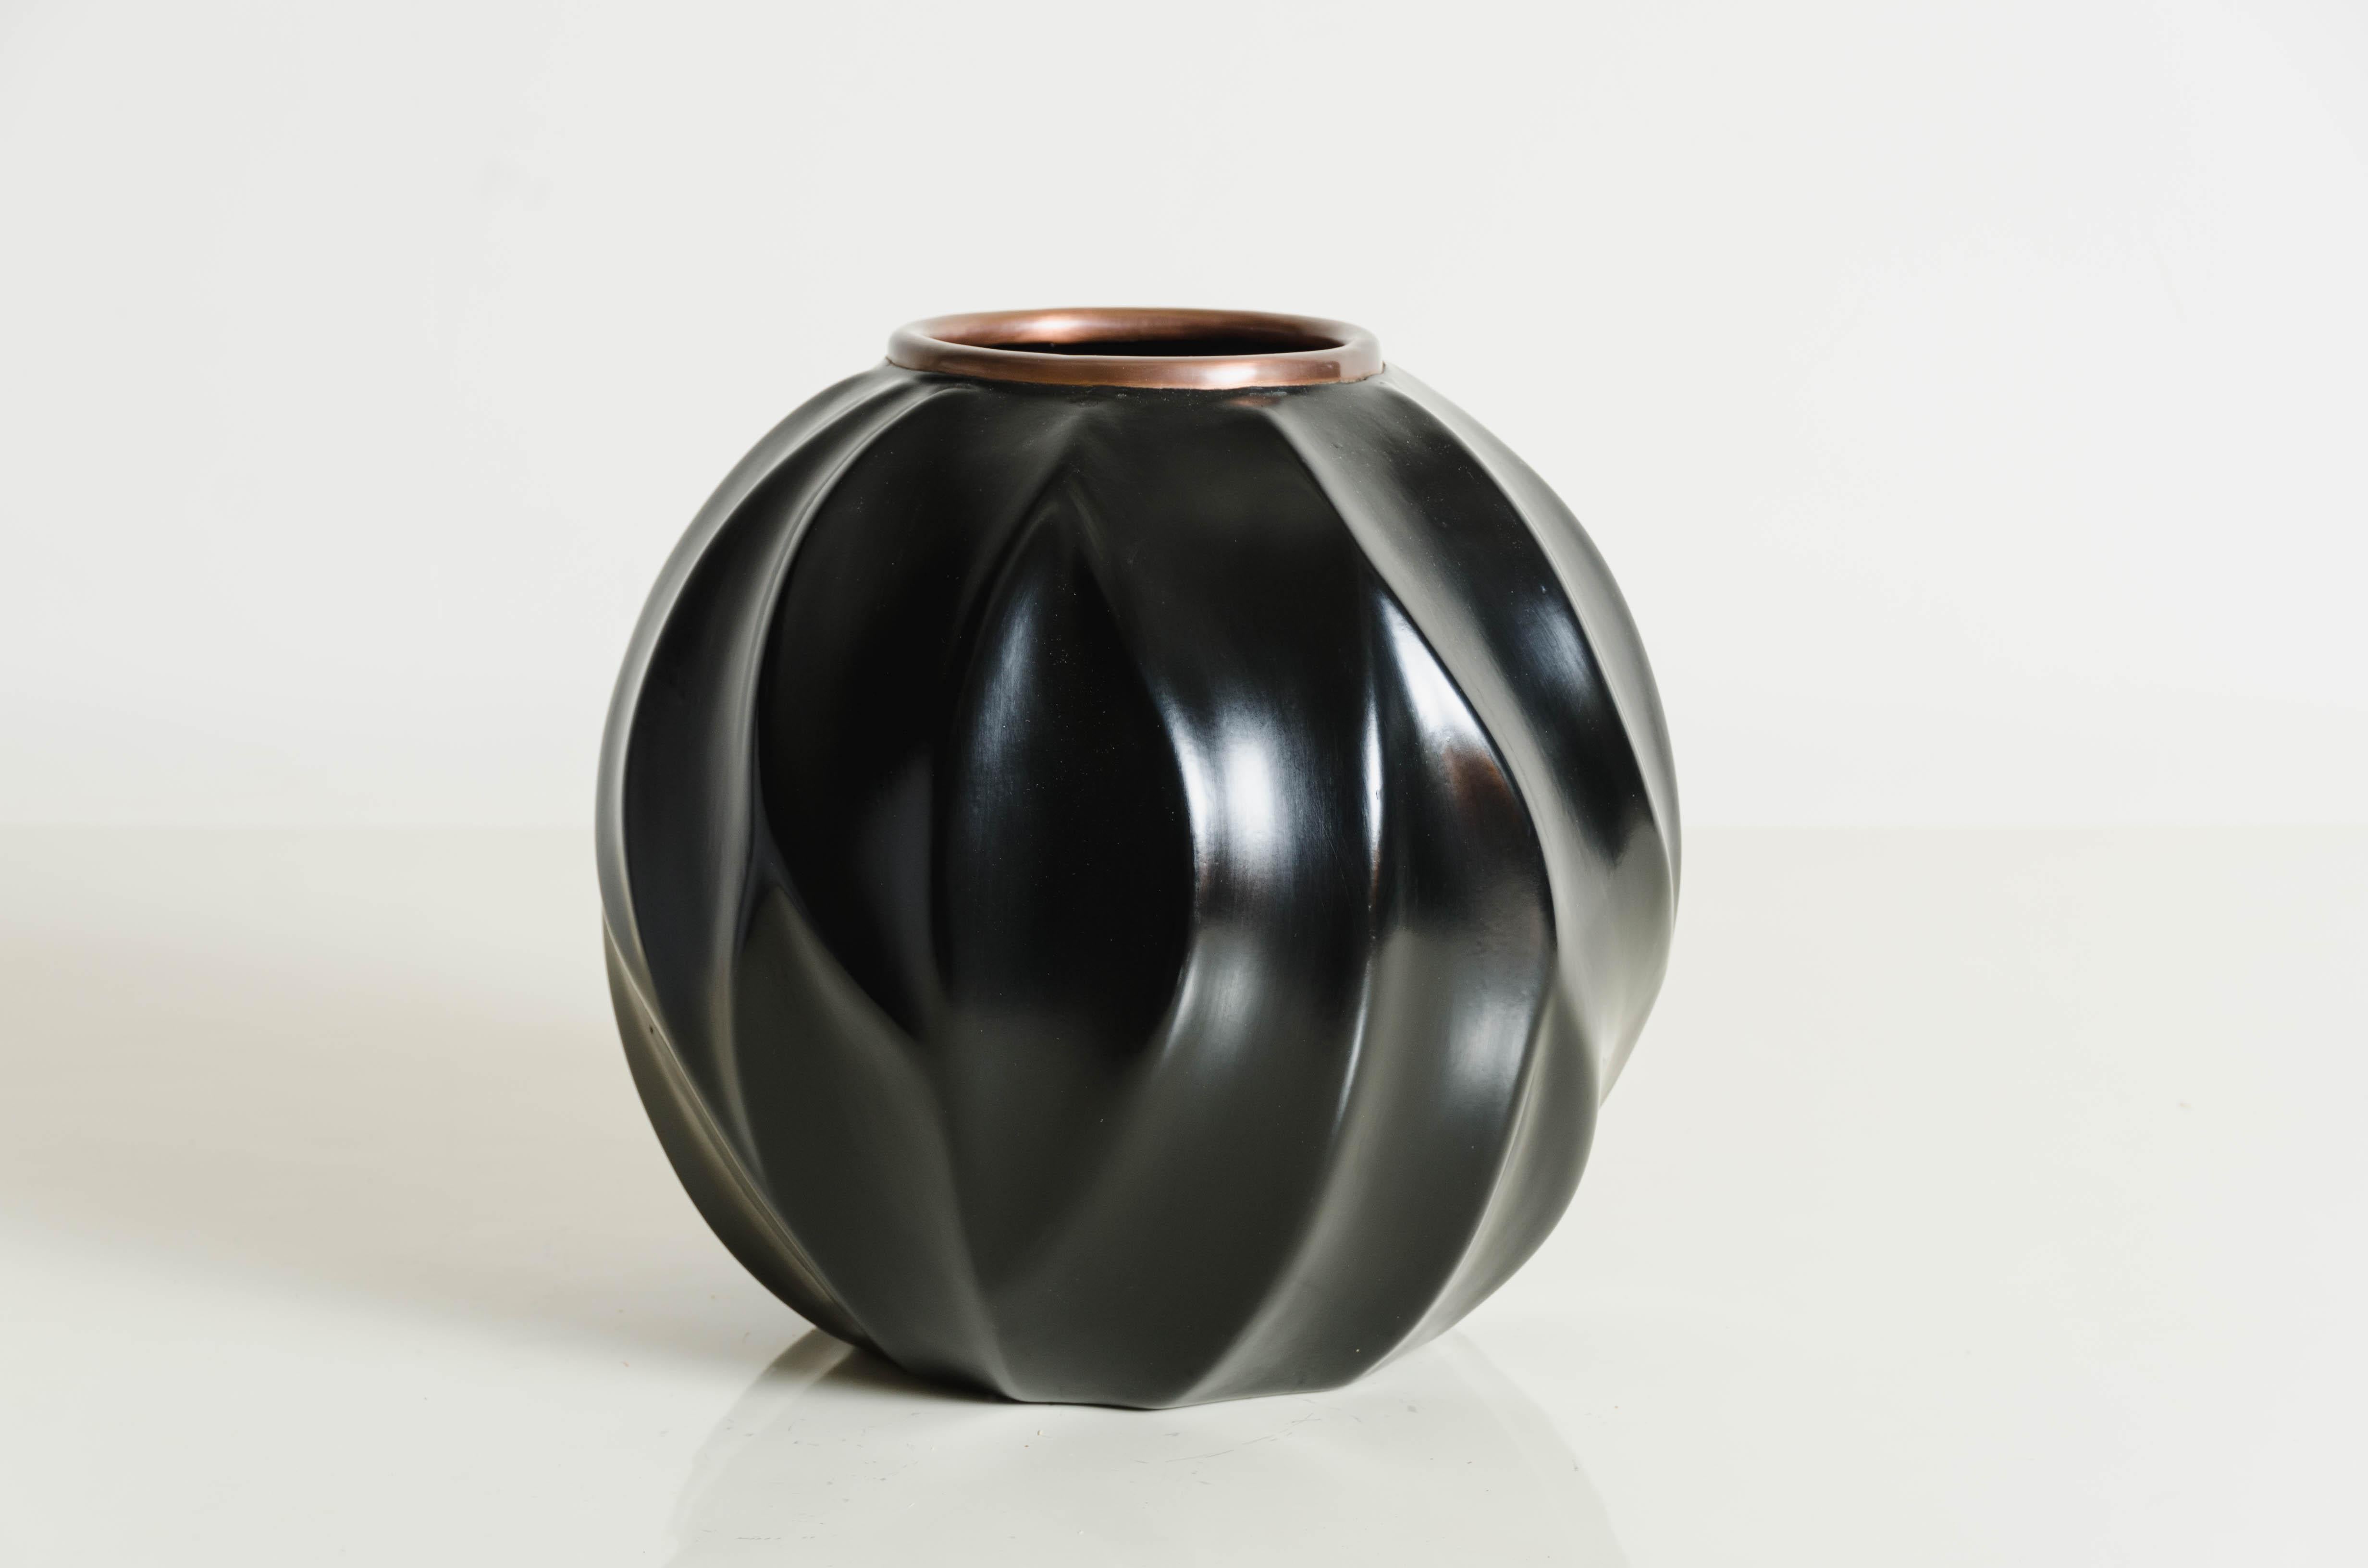 Chinese Leaf Jar with Copper Rim in Black Lacquer by Robert Kuo, Limited Edition For Sale